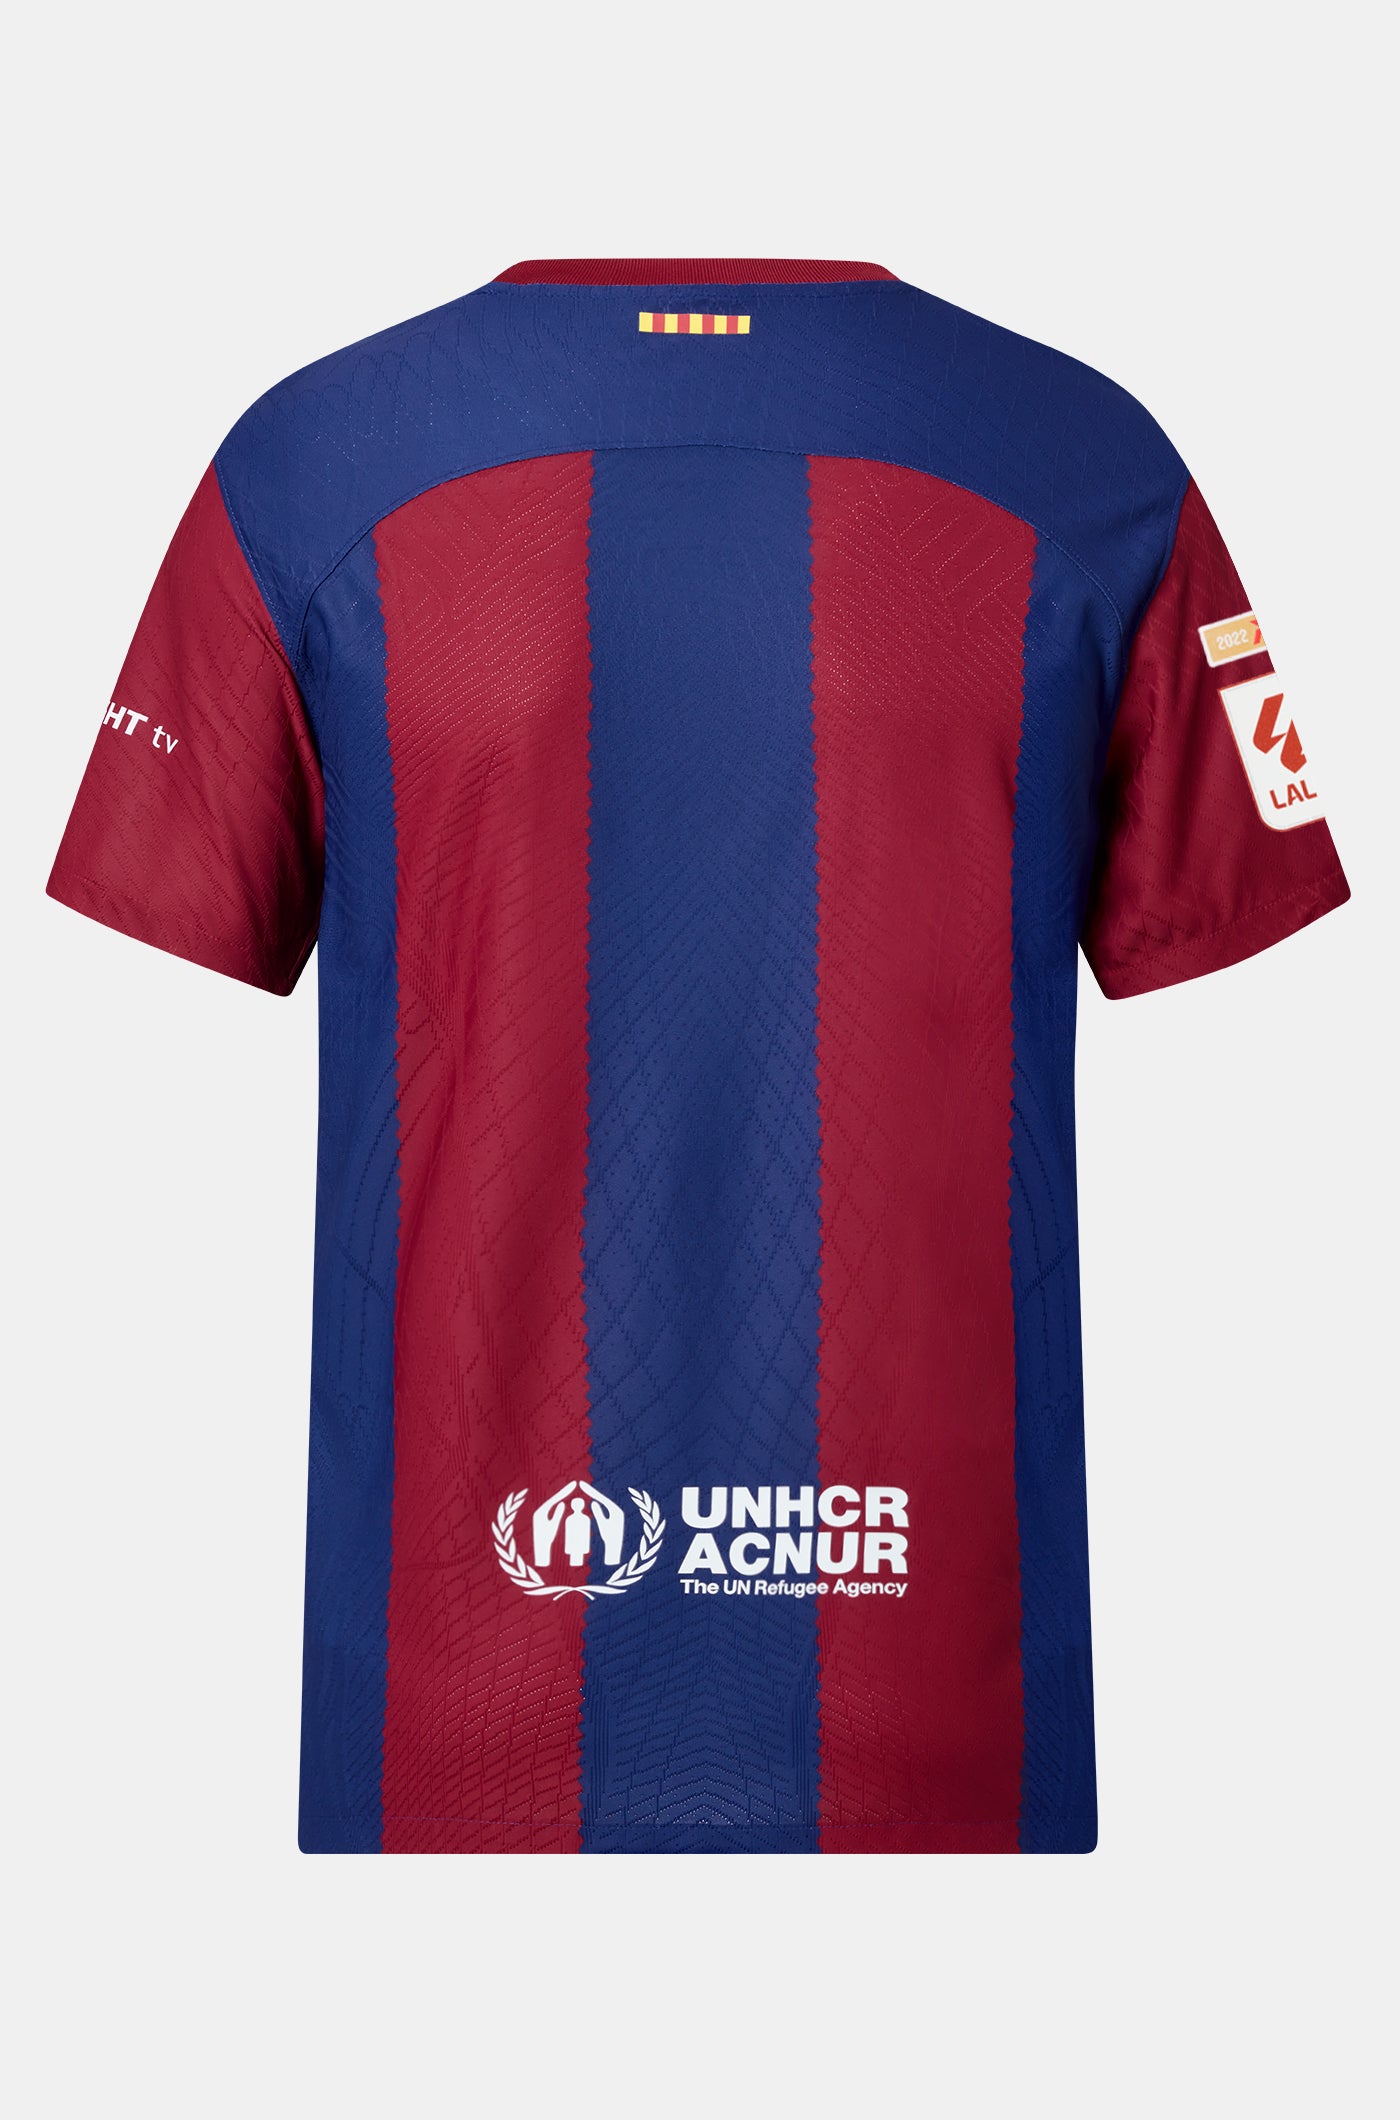 SIGNED | Limited Edition FC BARCELONA x KAROL G 23/24 men's home jersey signed by the starting line-ups of the men's El Clásico match (21/04) and the women's match vs. Villarreal (13/04)